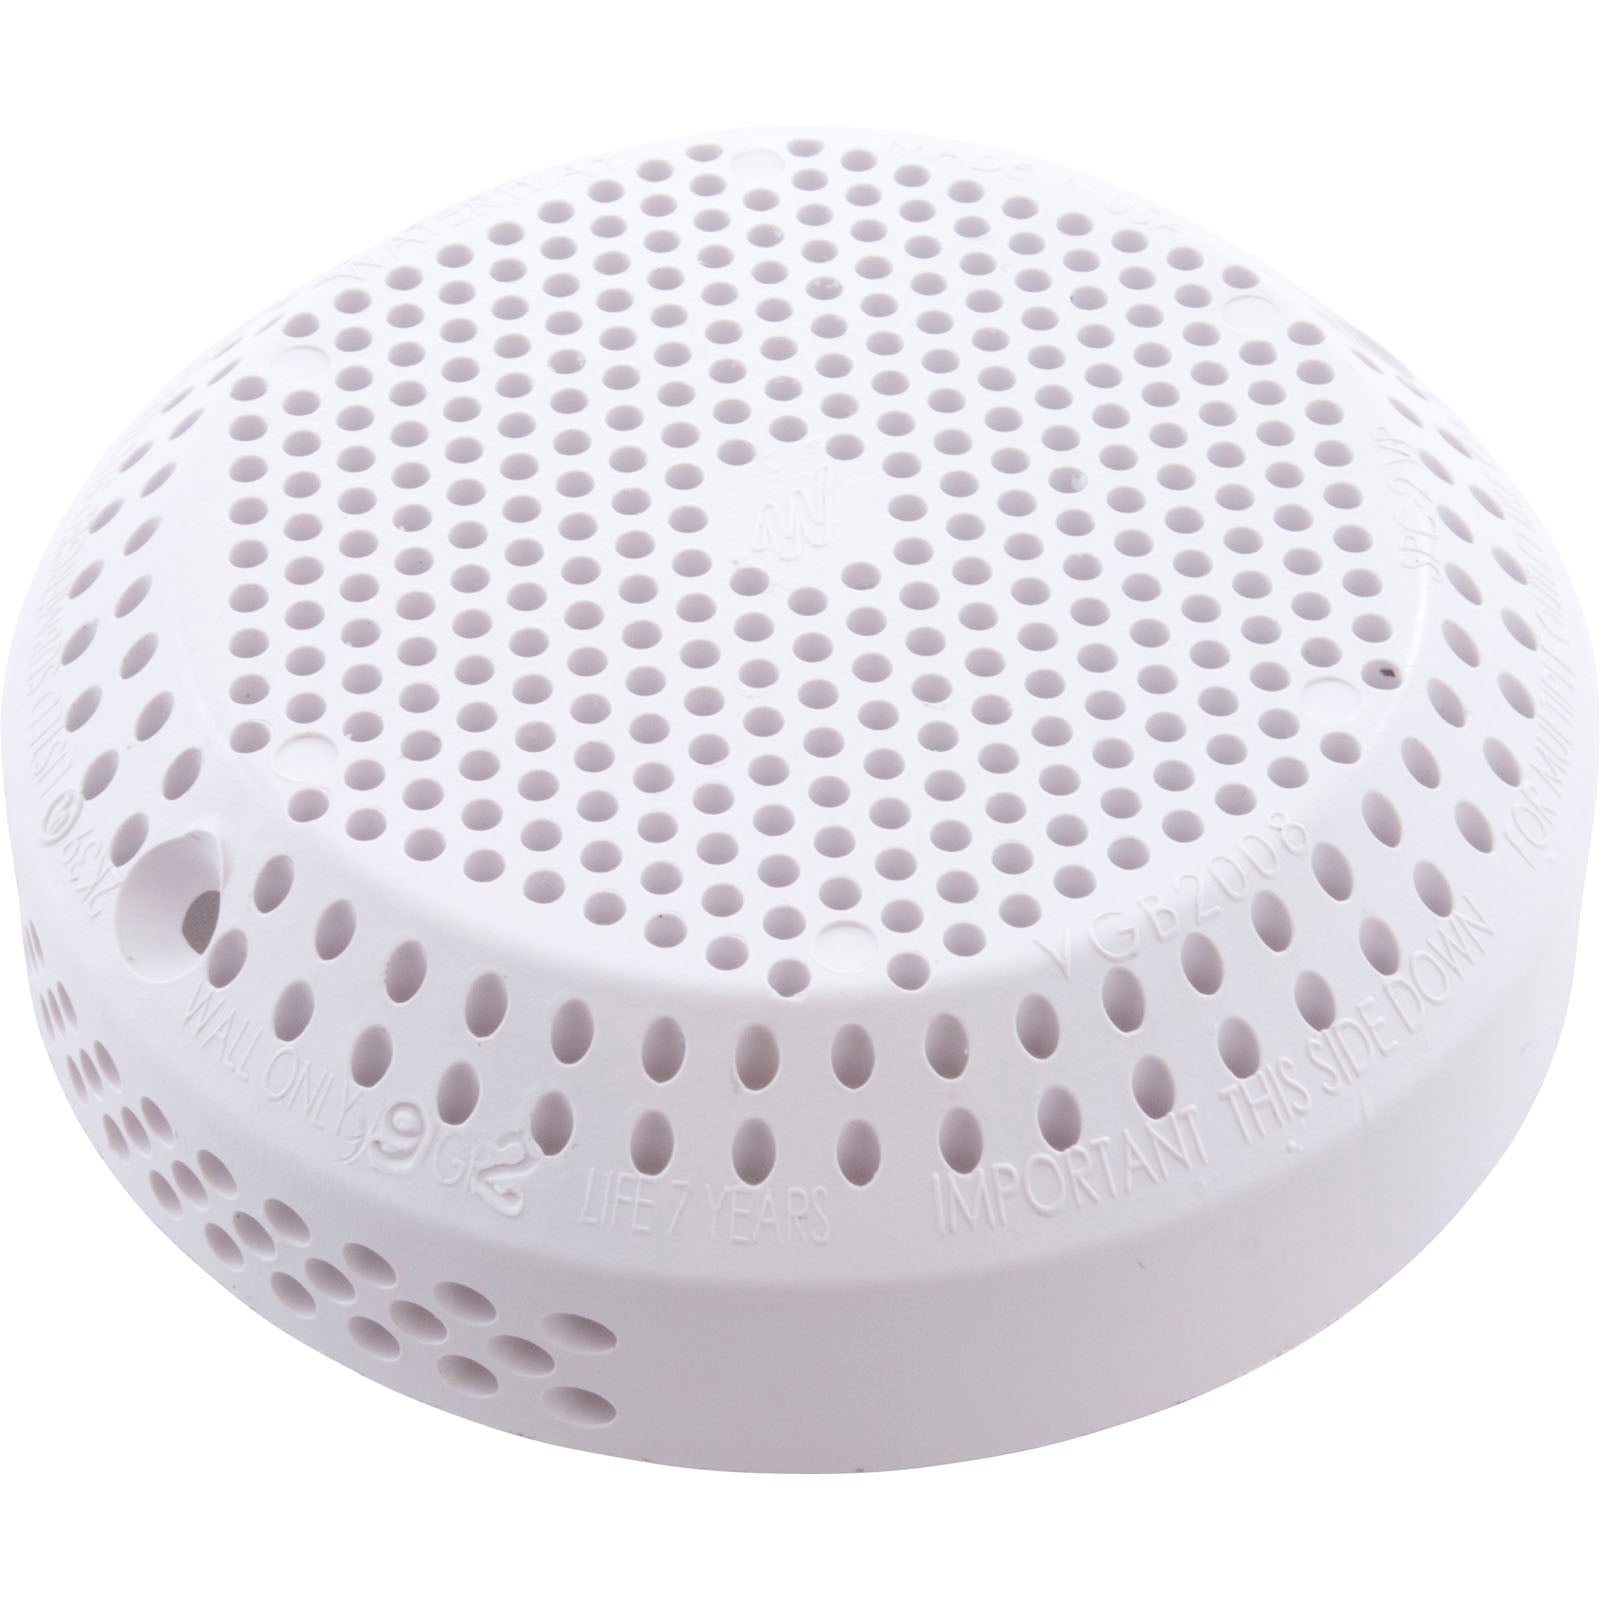 Waterway Suction Cover, 3-1/2" Hi-Flo, White (642-3250 V)